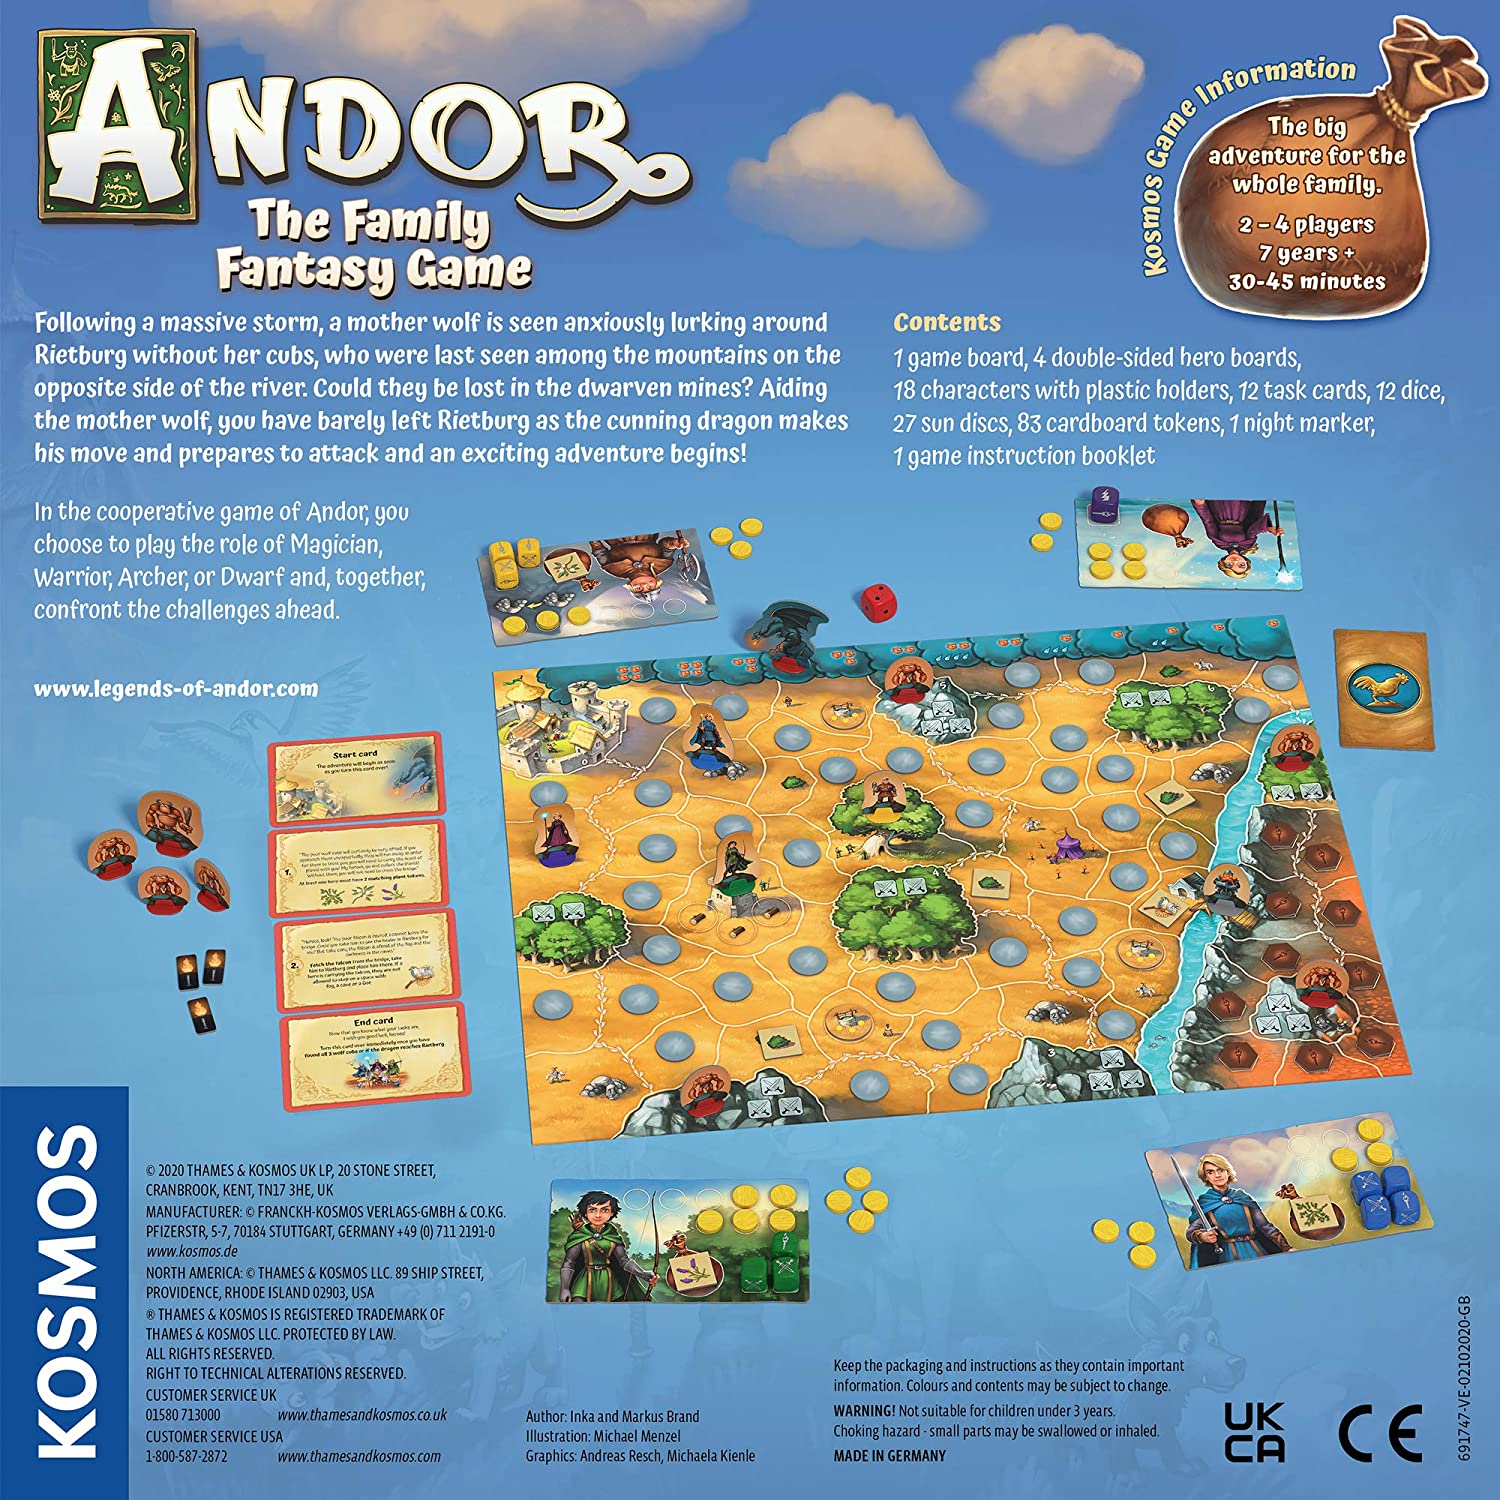 Find out about Andor: The Family Fantasy Game